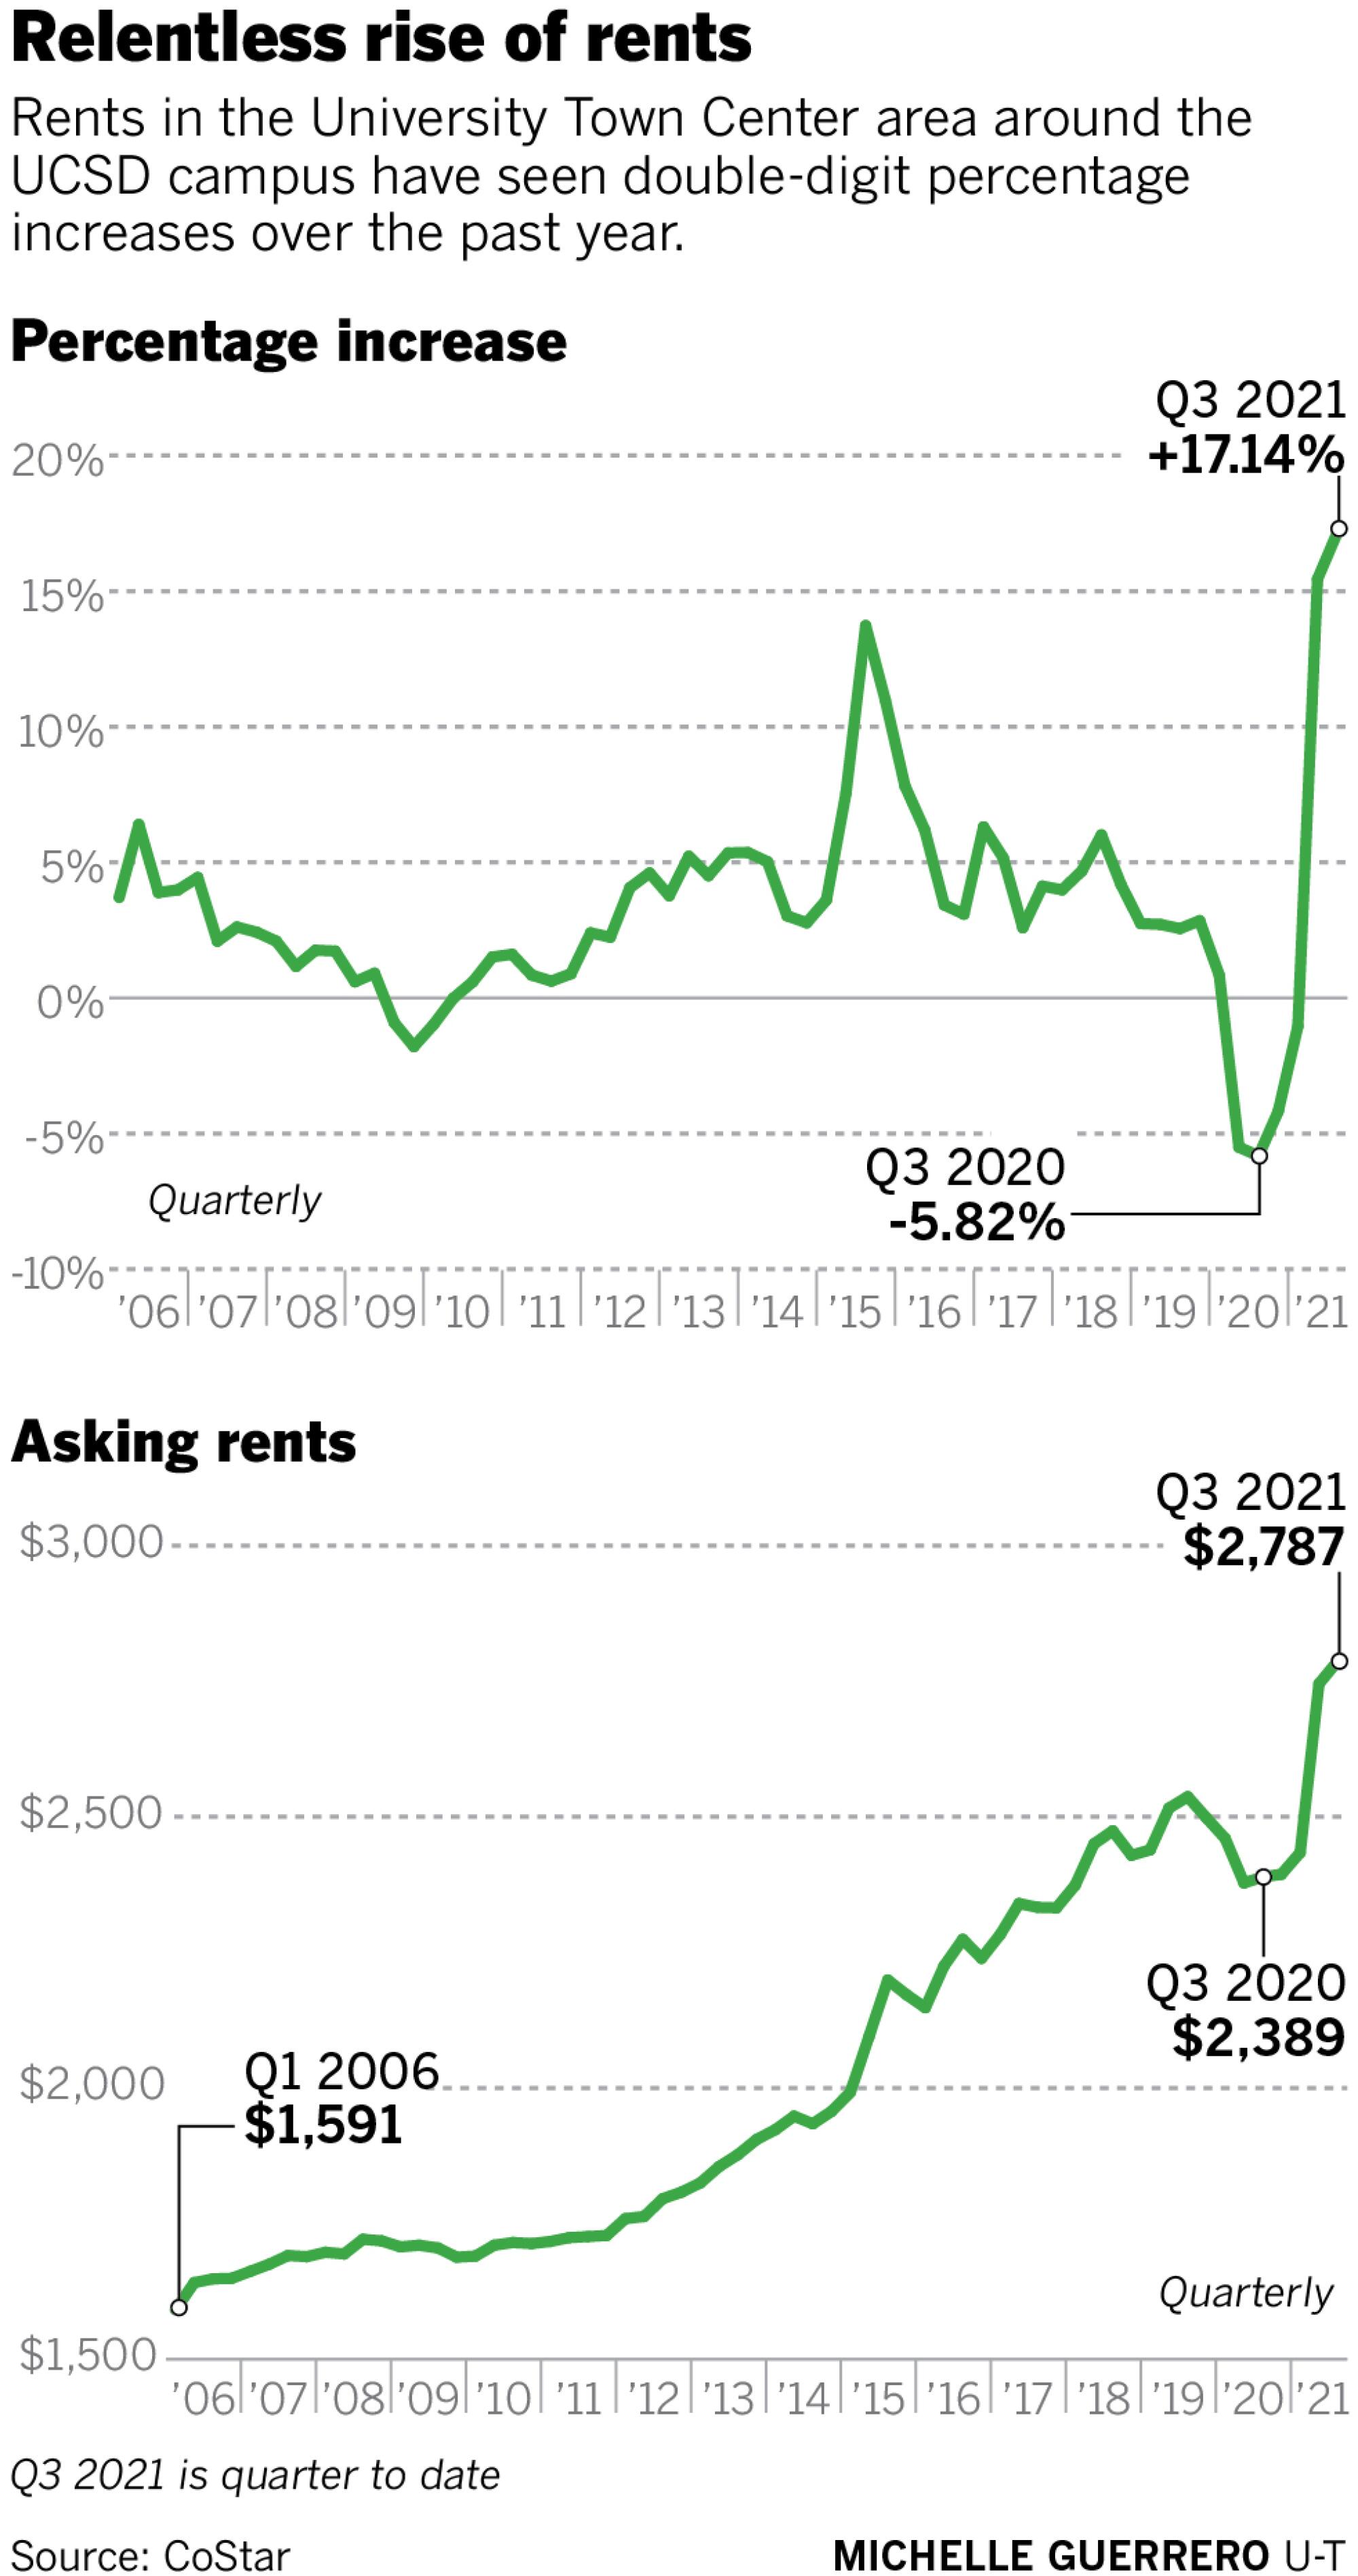 Relentless rise of rents